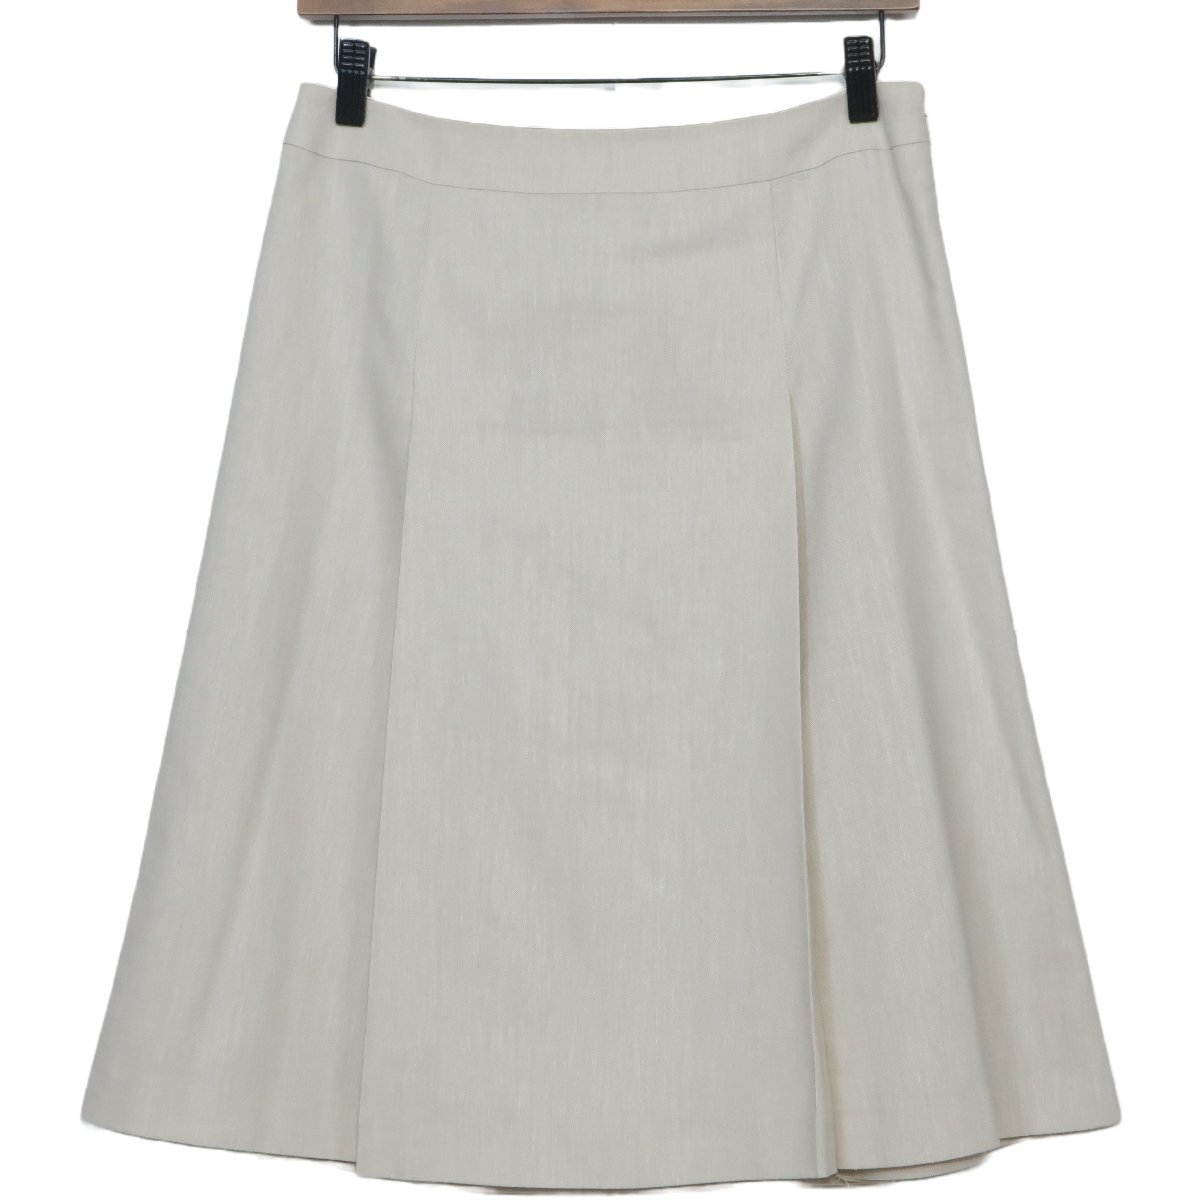  Keith * skirt box pleat large size 40 flax . beige group z3905